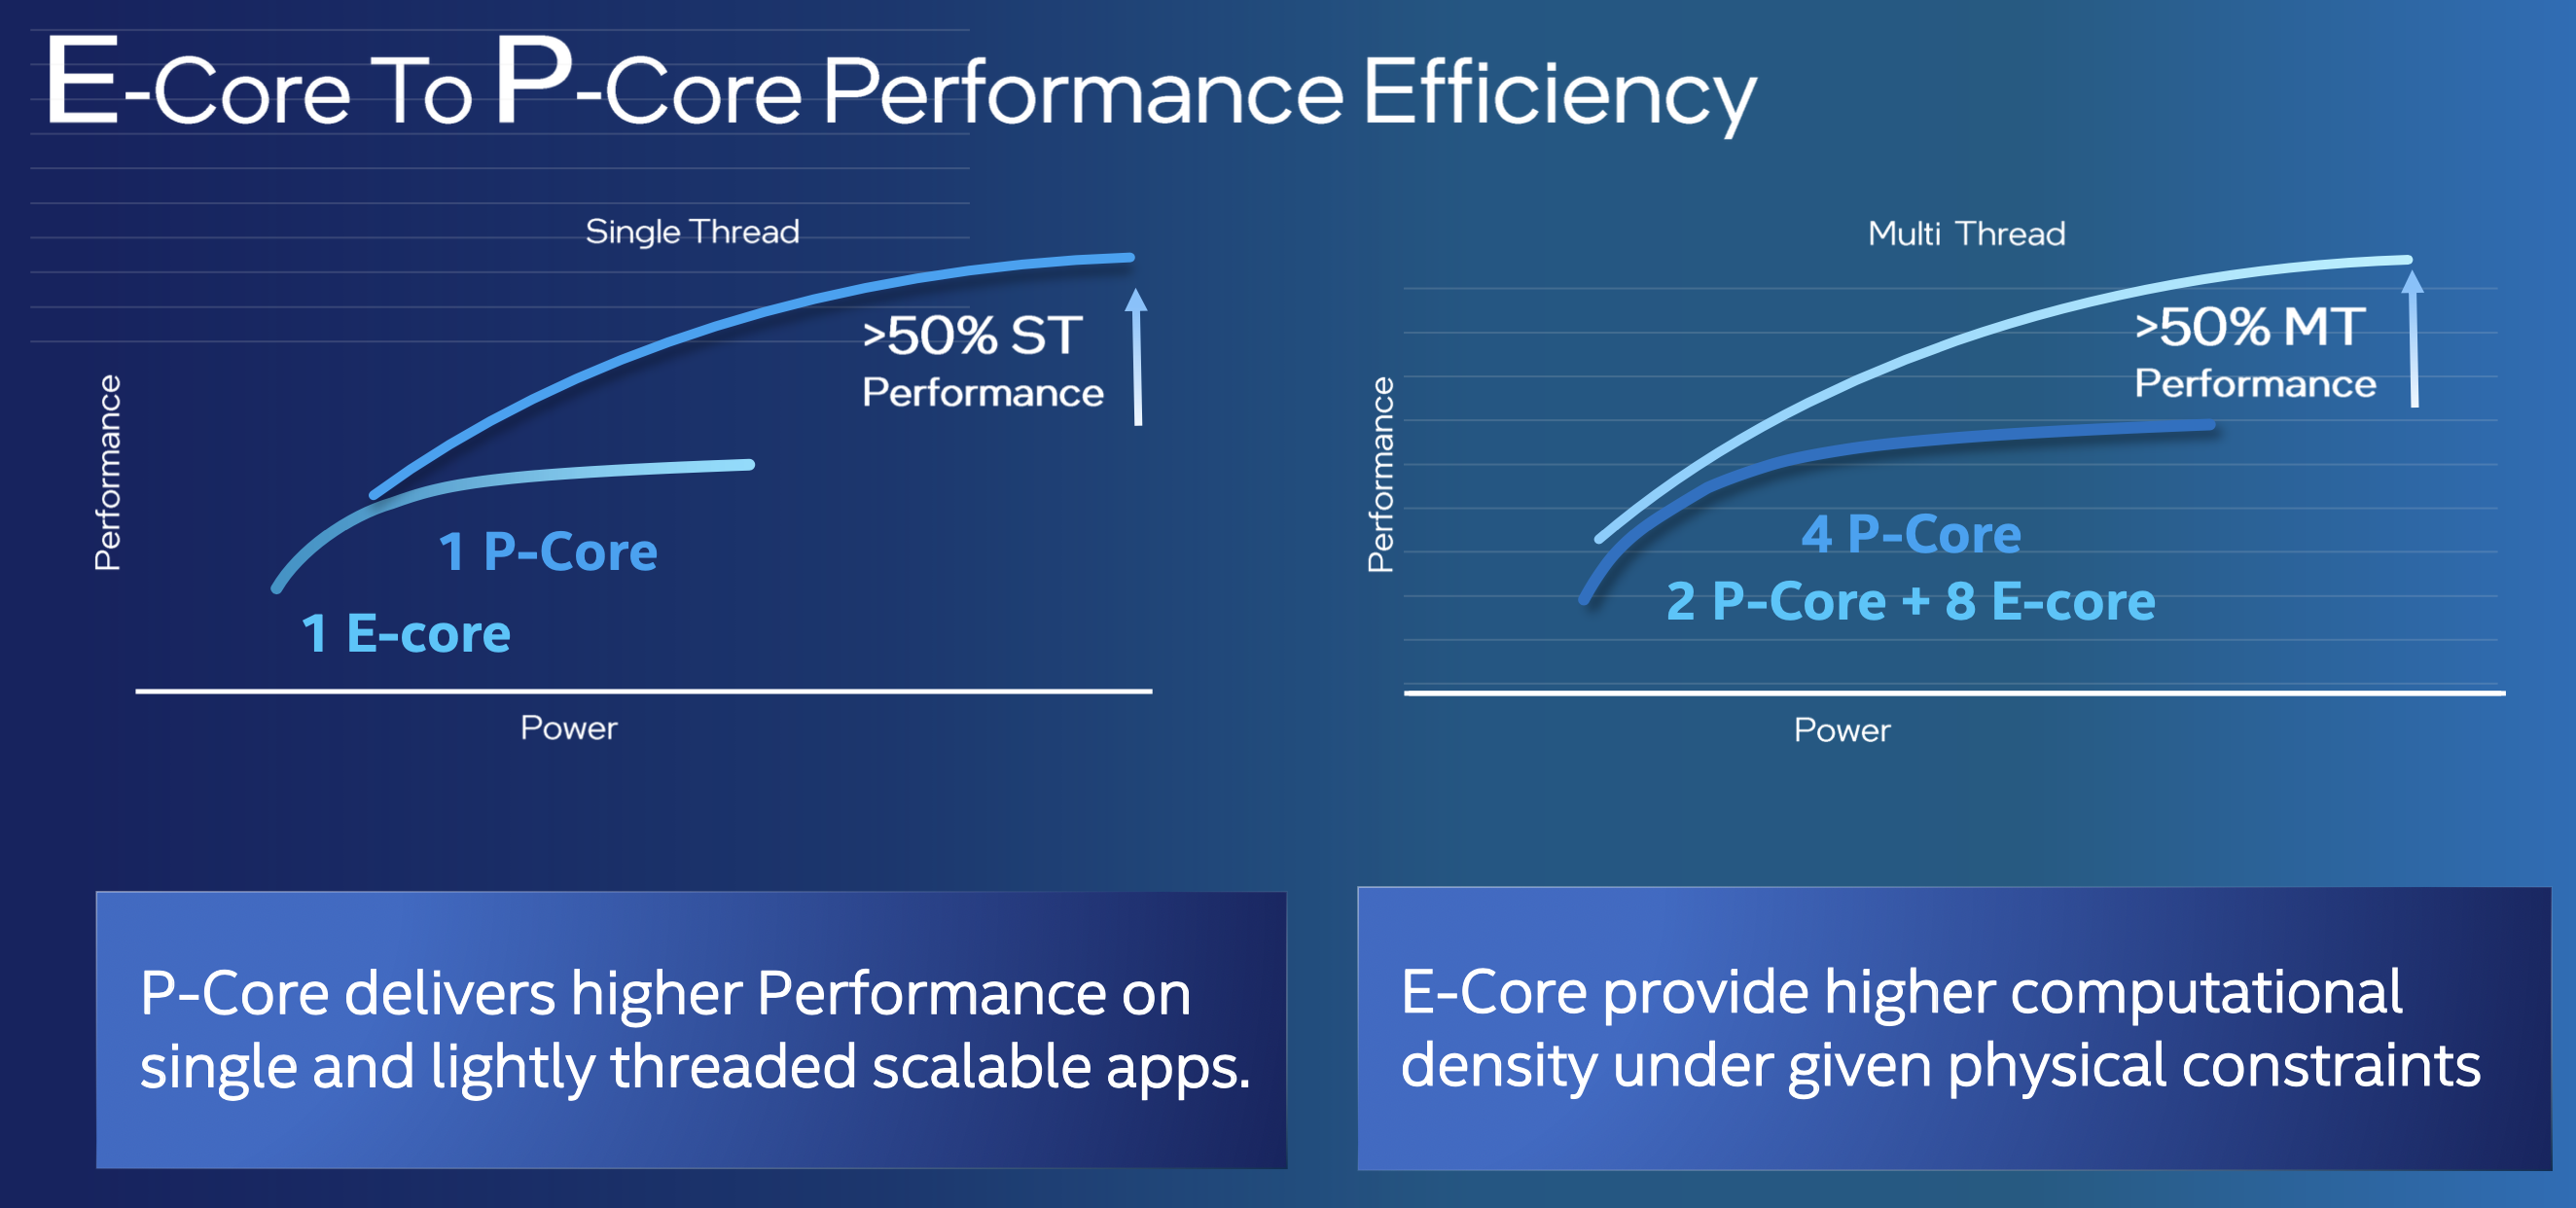 Processor vendors are starting to emphasize microarchitectural improvements and data movement over process node scaling, setting the stage for much bi